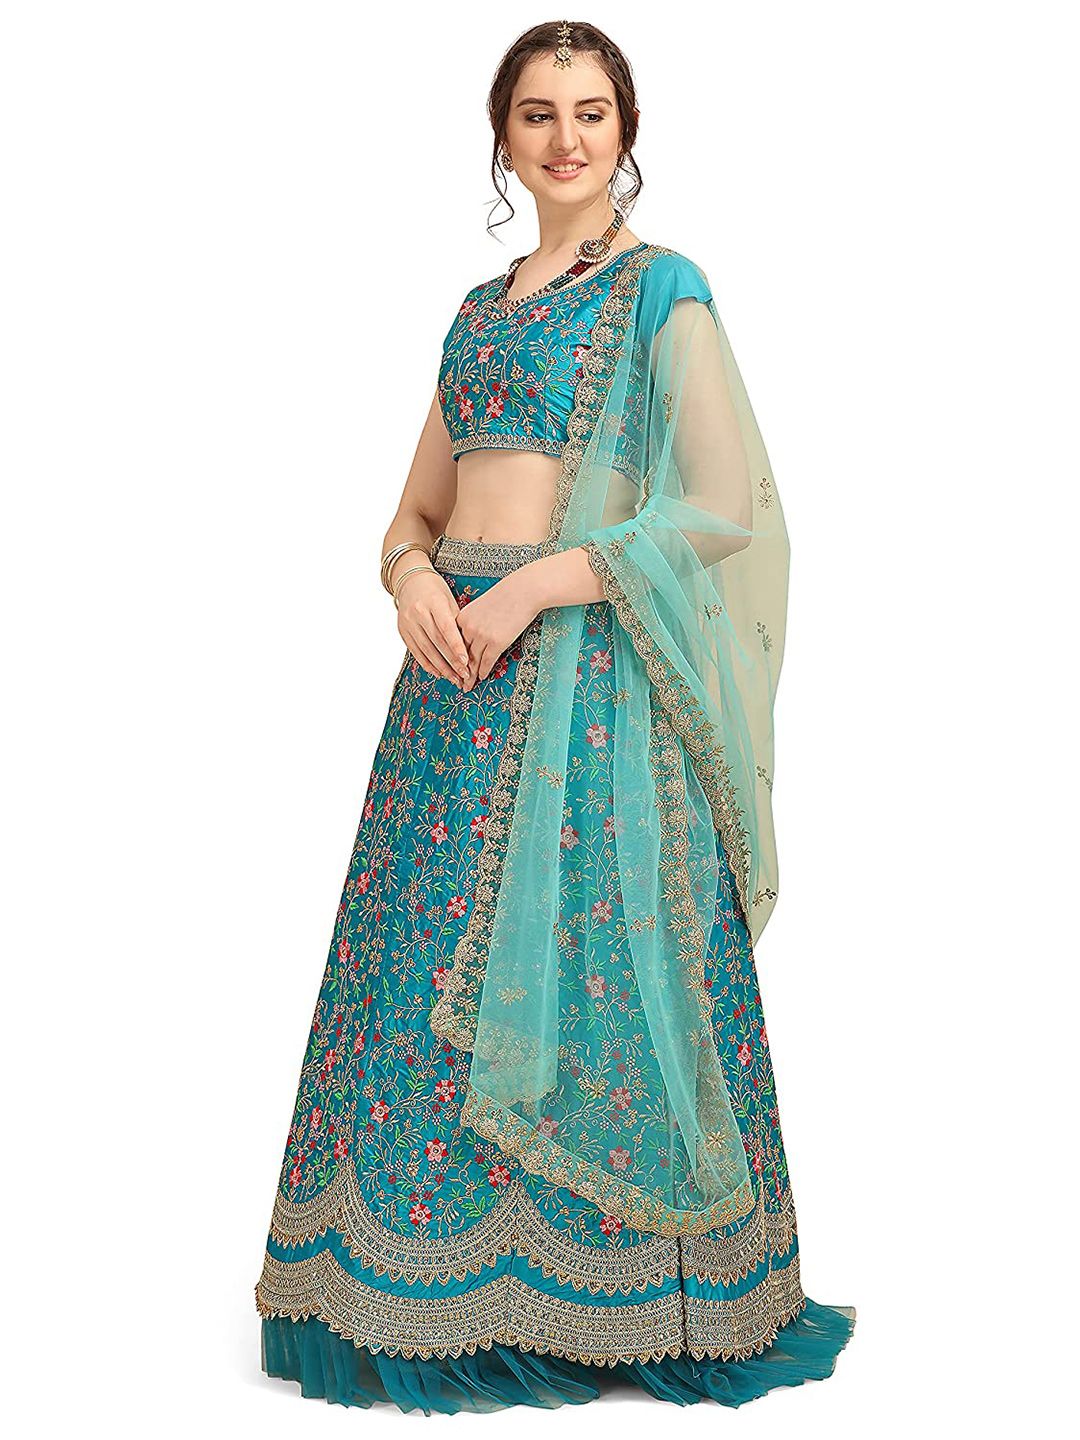 Zainab chottani Blue & Pink Embroidered Thread Work Semi-Stitched Lehenga & Unstitched Blouse With Dupatta Price in India